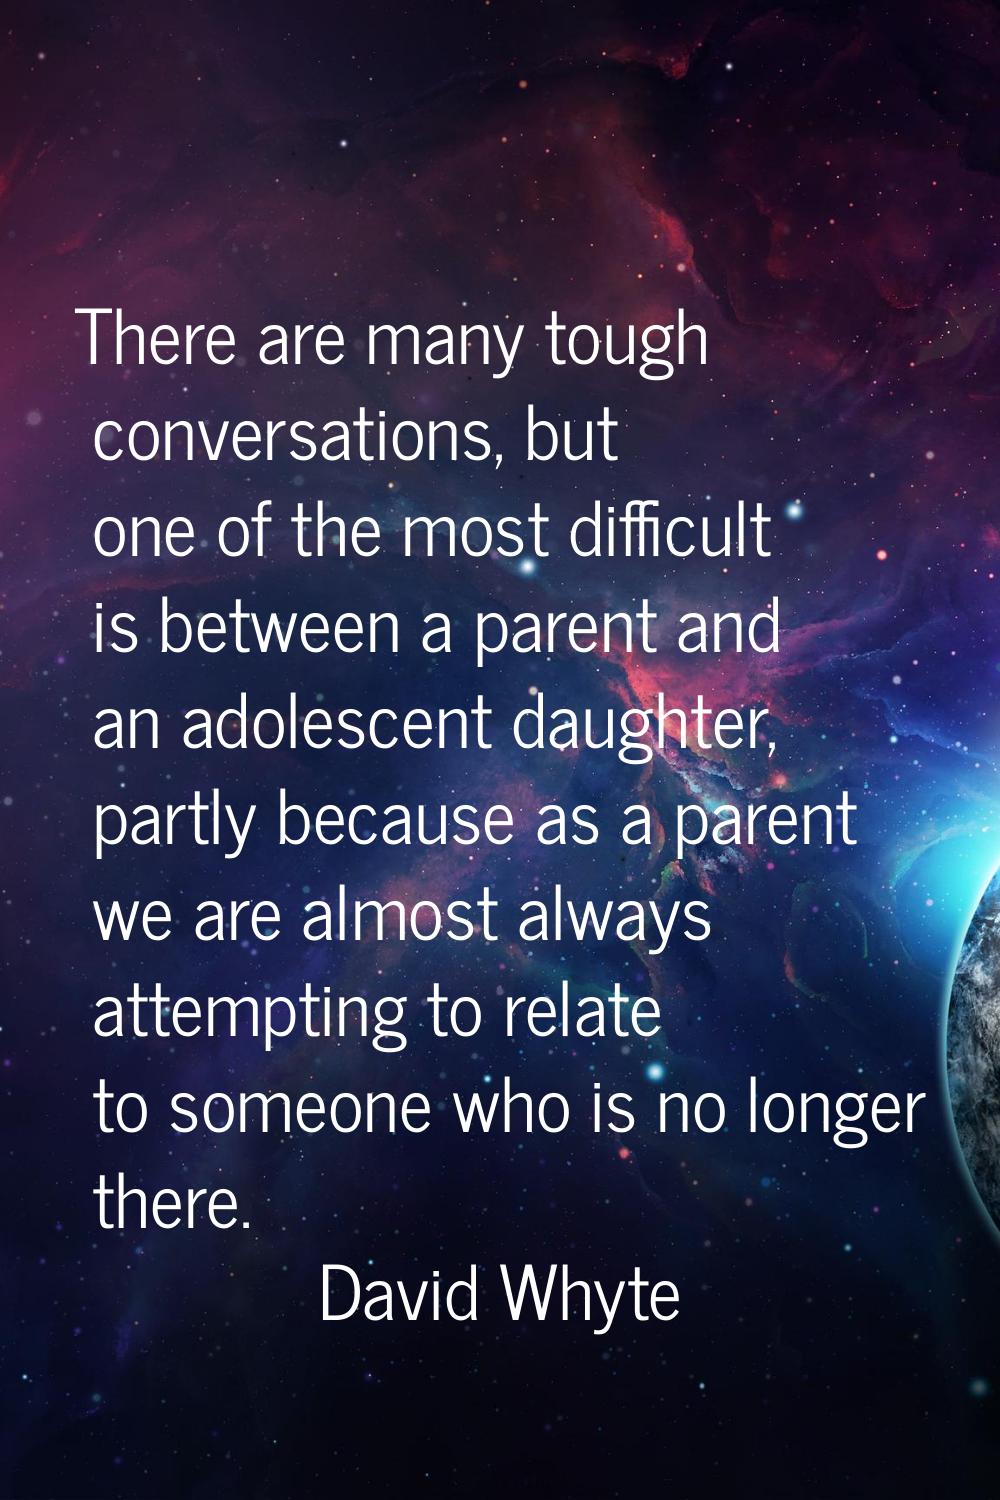 There are many tough conversations, but one of the most difficult is between a parent and an adoles